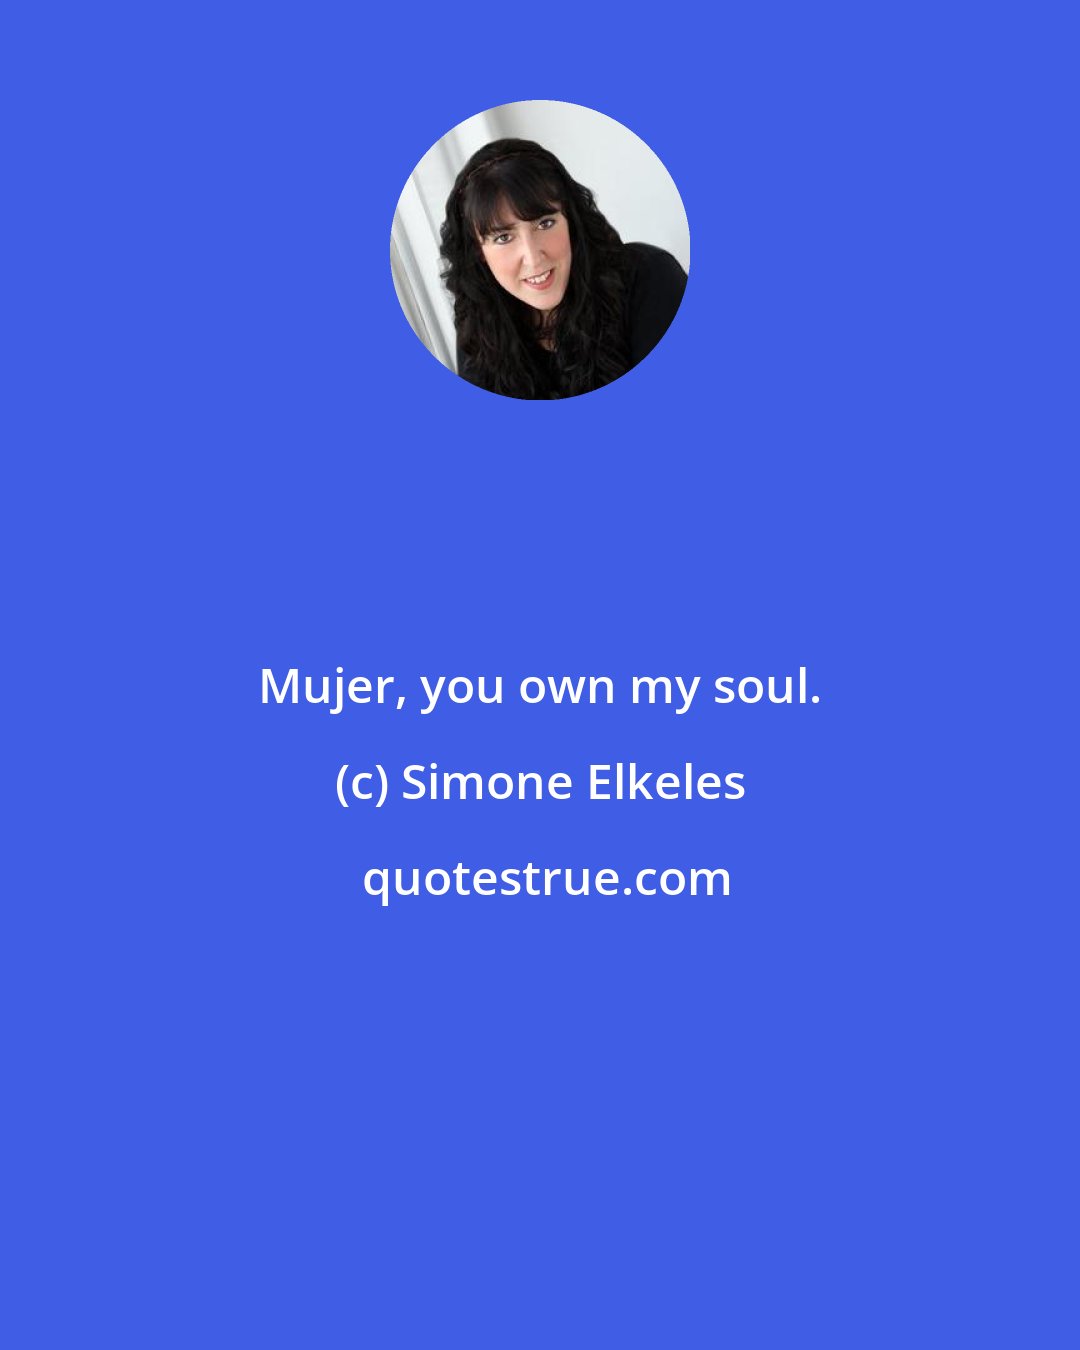 Simone Elkeles: Mujer, you own my soul.